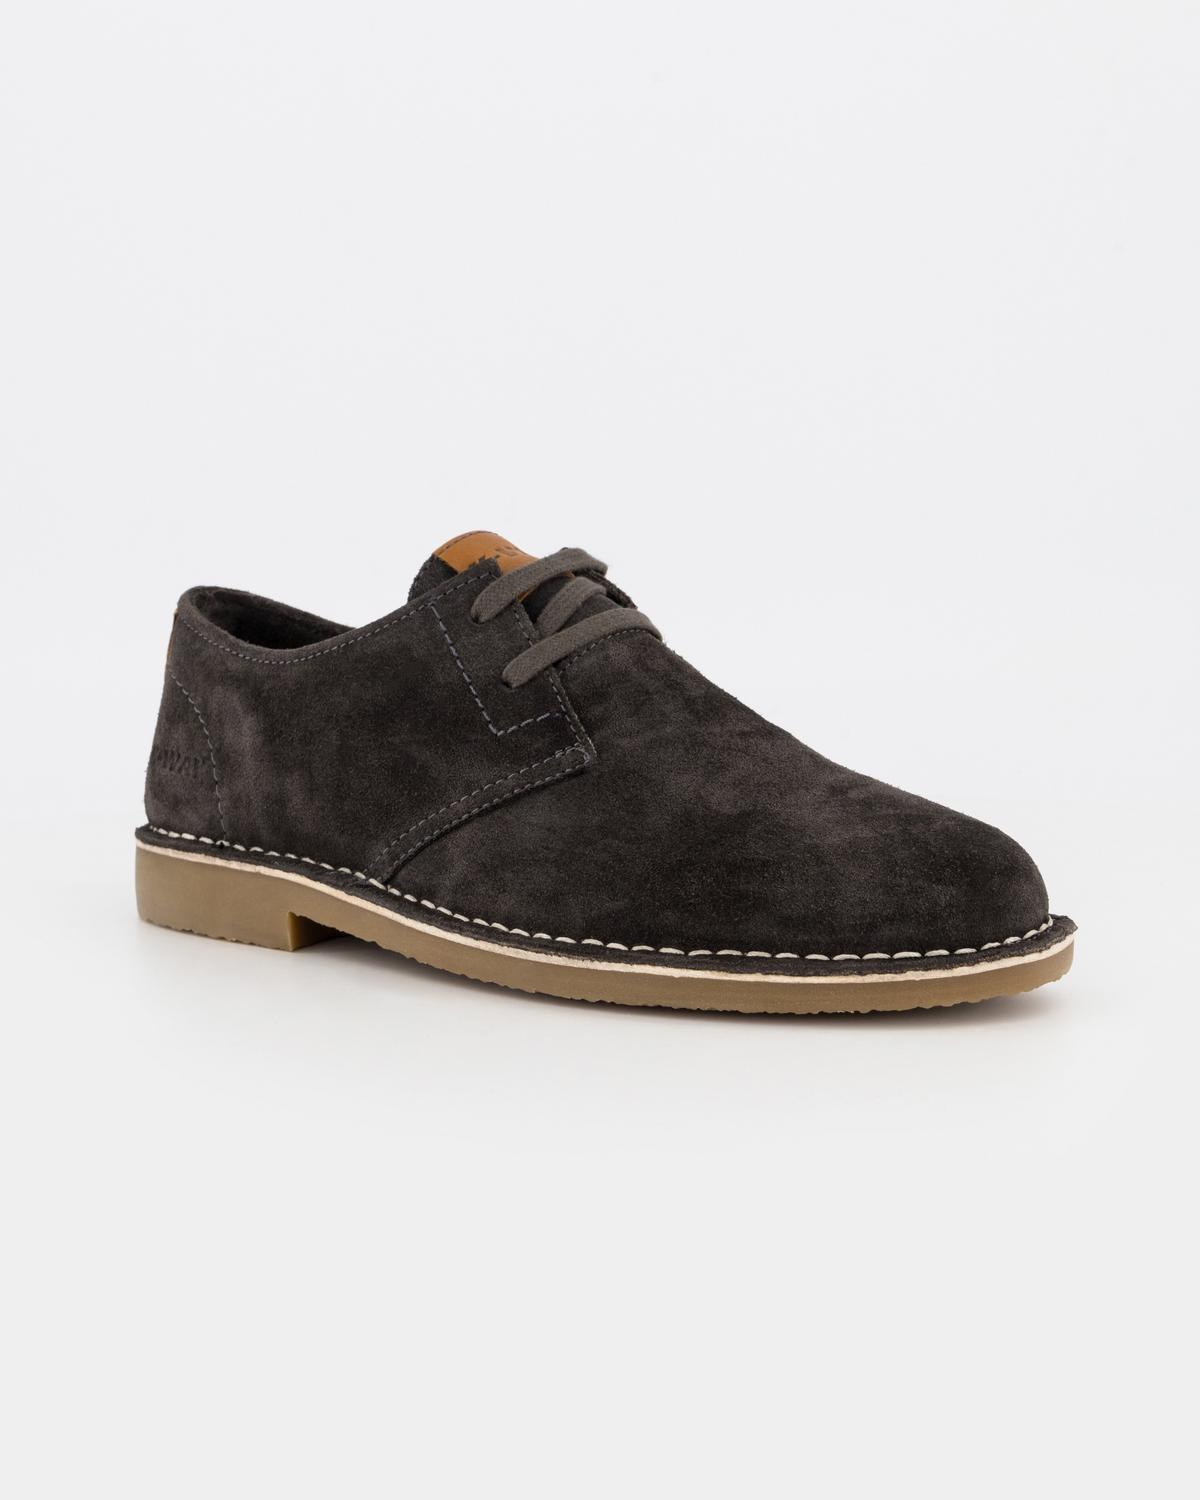 K-Way Elements Men’s Charles Derby Shoes -  Charcoal